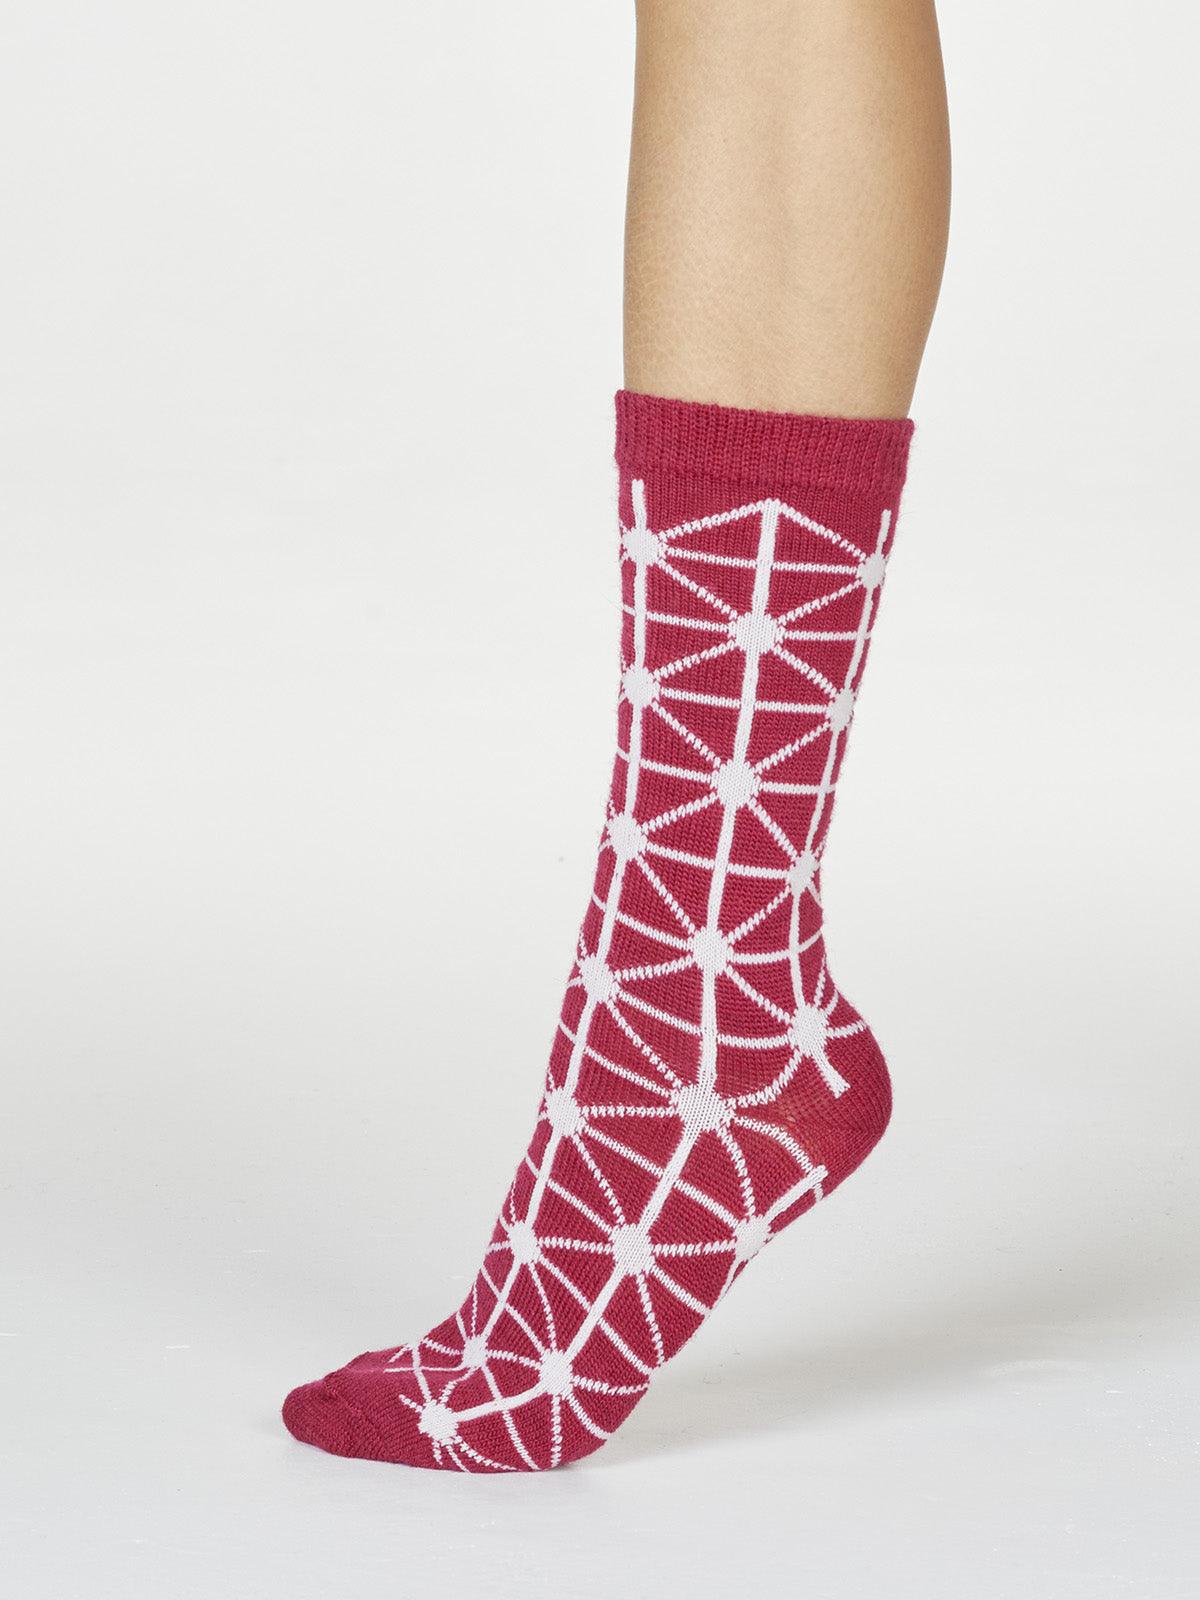 Jannie Wool Socks - Cranberry Red - Thought Clothing UK